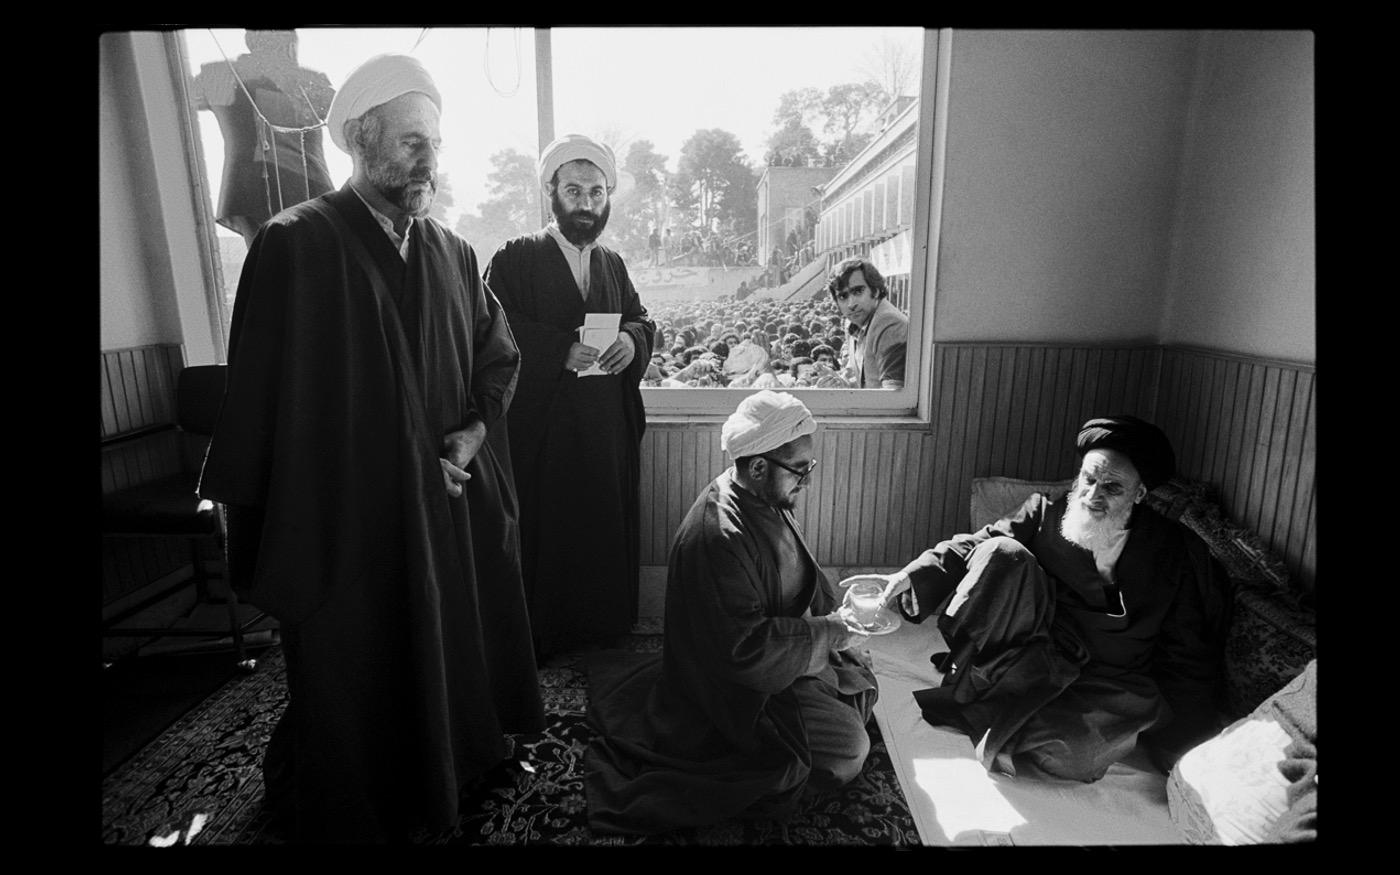 Ayatollah Khomeini at his Refa School office in Tehran, after returning from exile 1979 : Looking Back: 60 Years of Photographs : David Burnett | Photographer